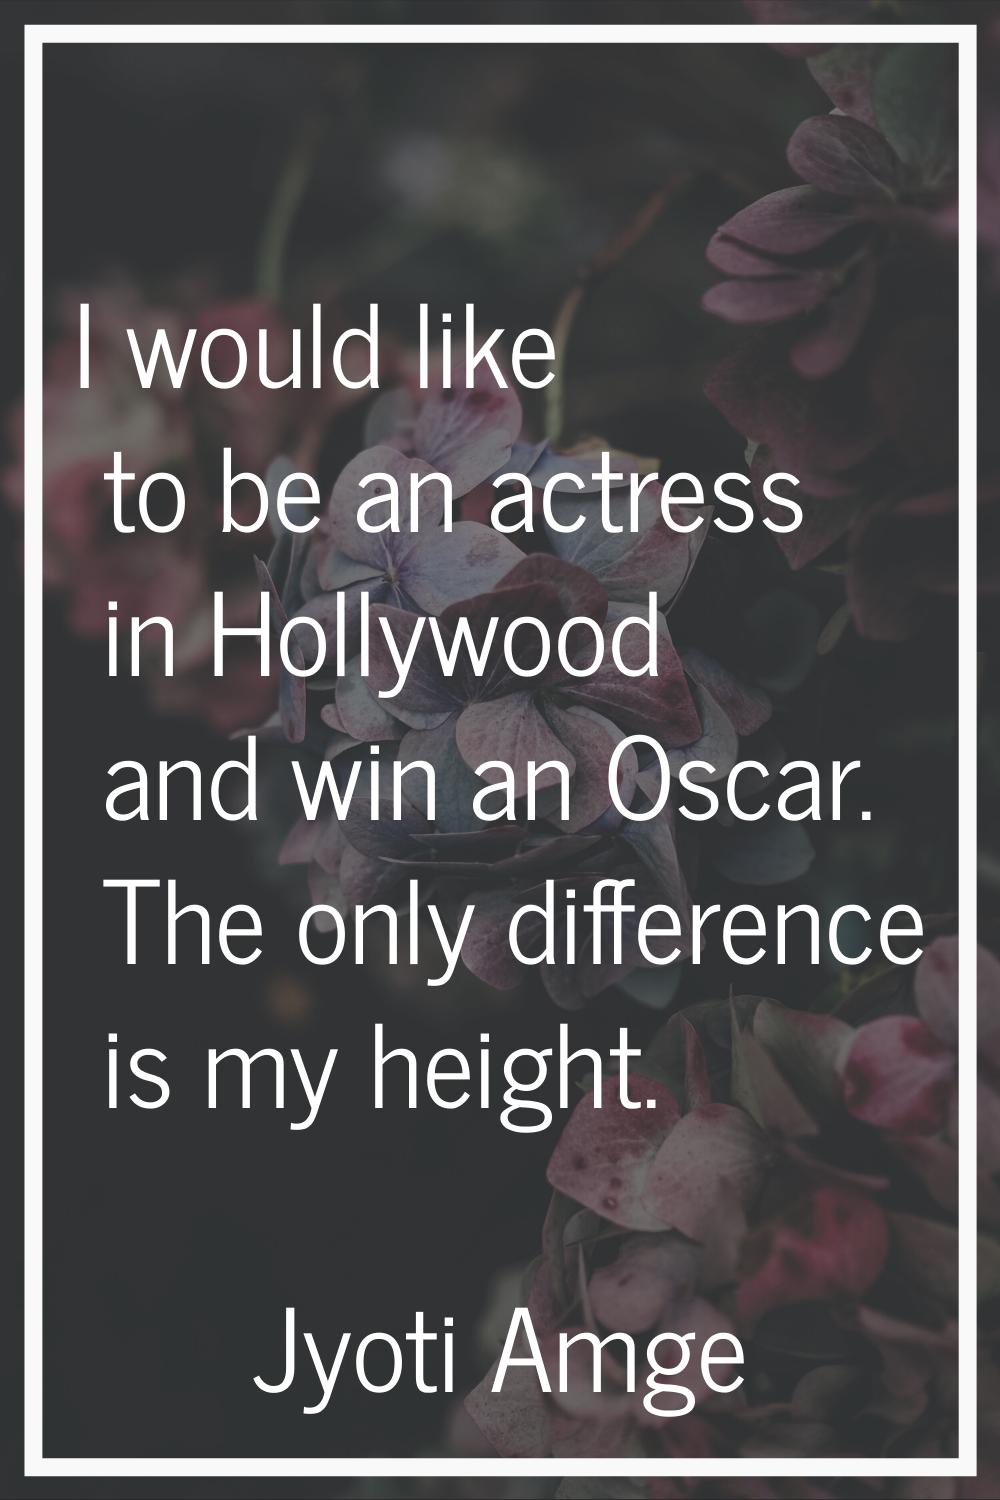 I would like to be an actress in Hollywood and win an Oscar. The only difference is my height.